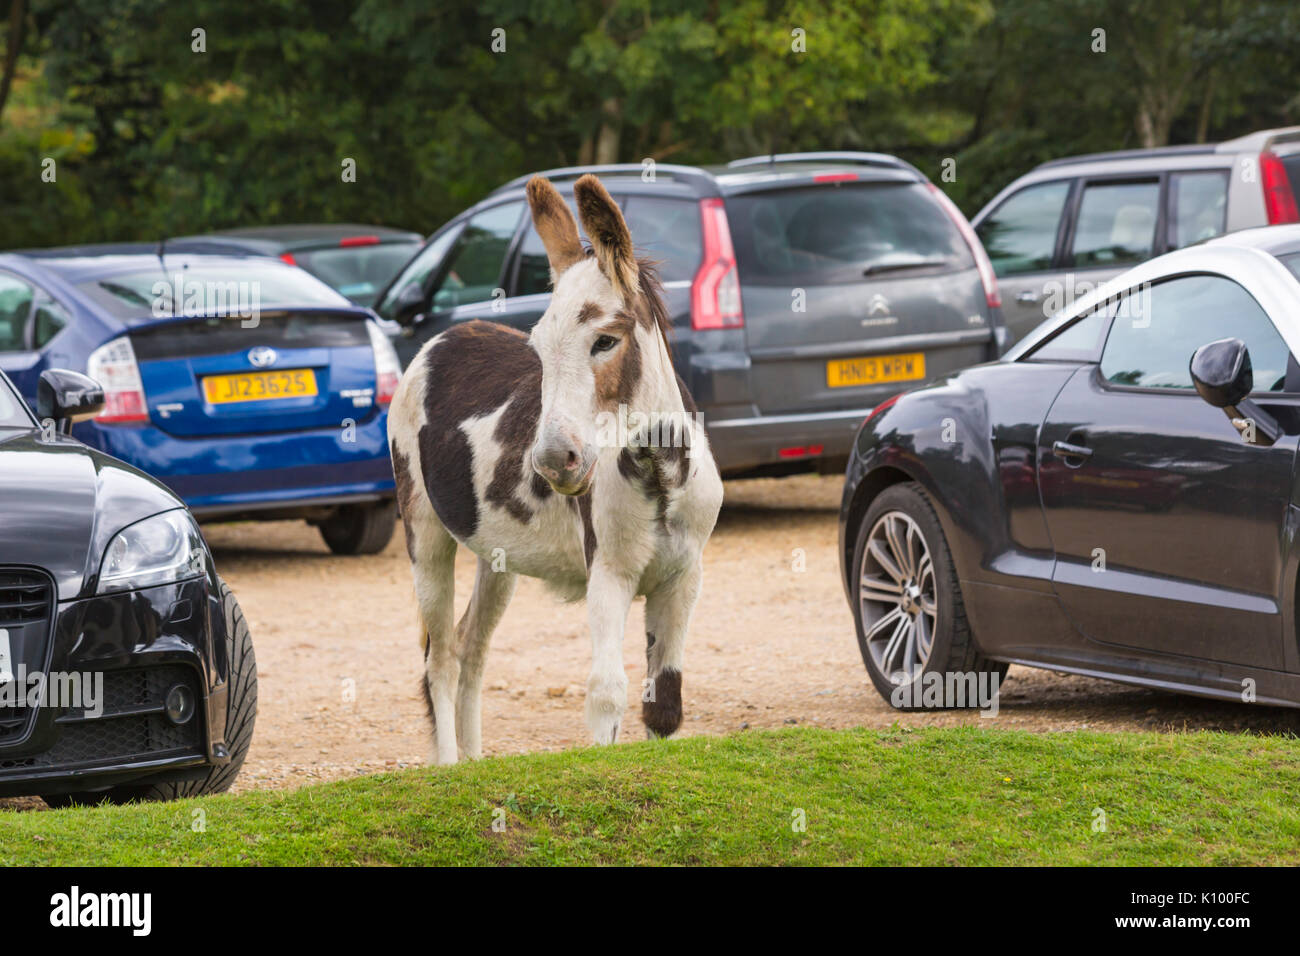 donkey-taking-up-car-park-space-in-car-p